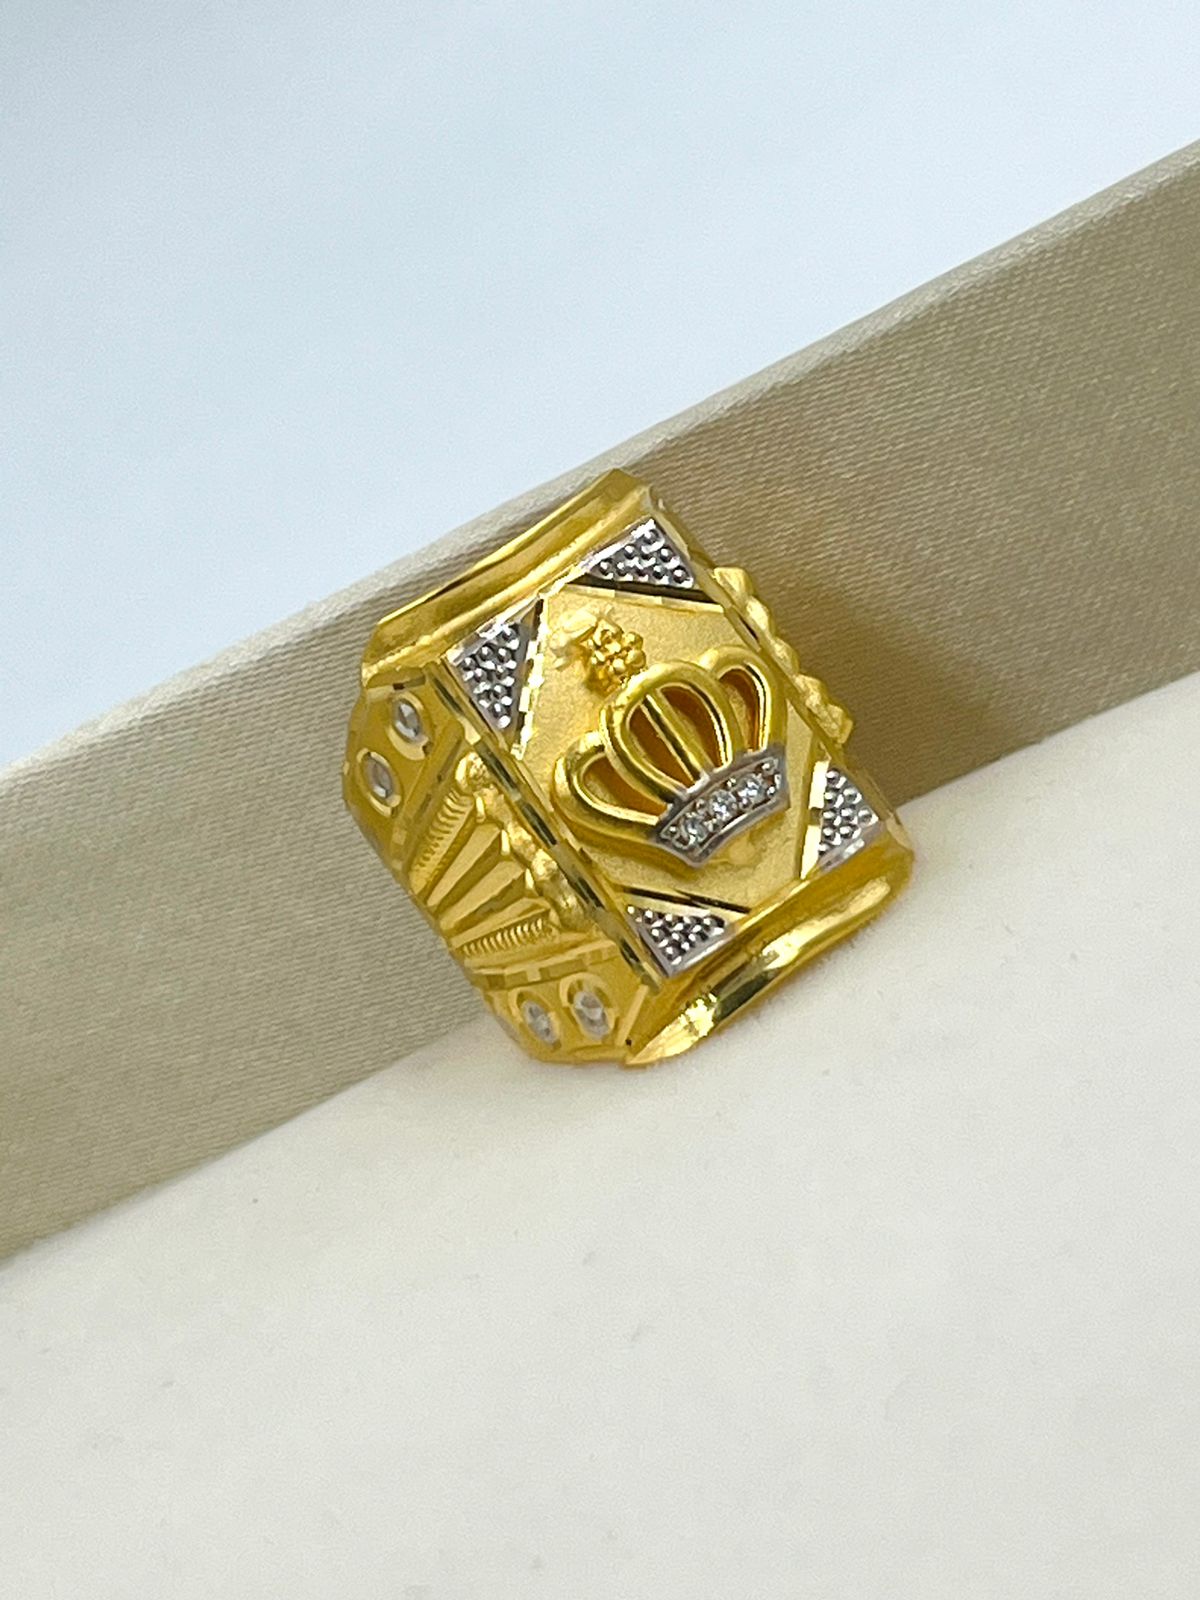 1 Gram Gold Plated Crown Chic Design Superior Quality Ring For Men - Style  B322 at Rs 1460.00 | Gold Plated Rings | ID: 2851122761288